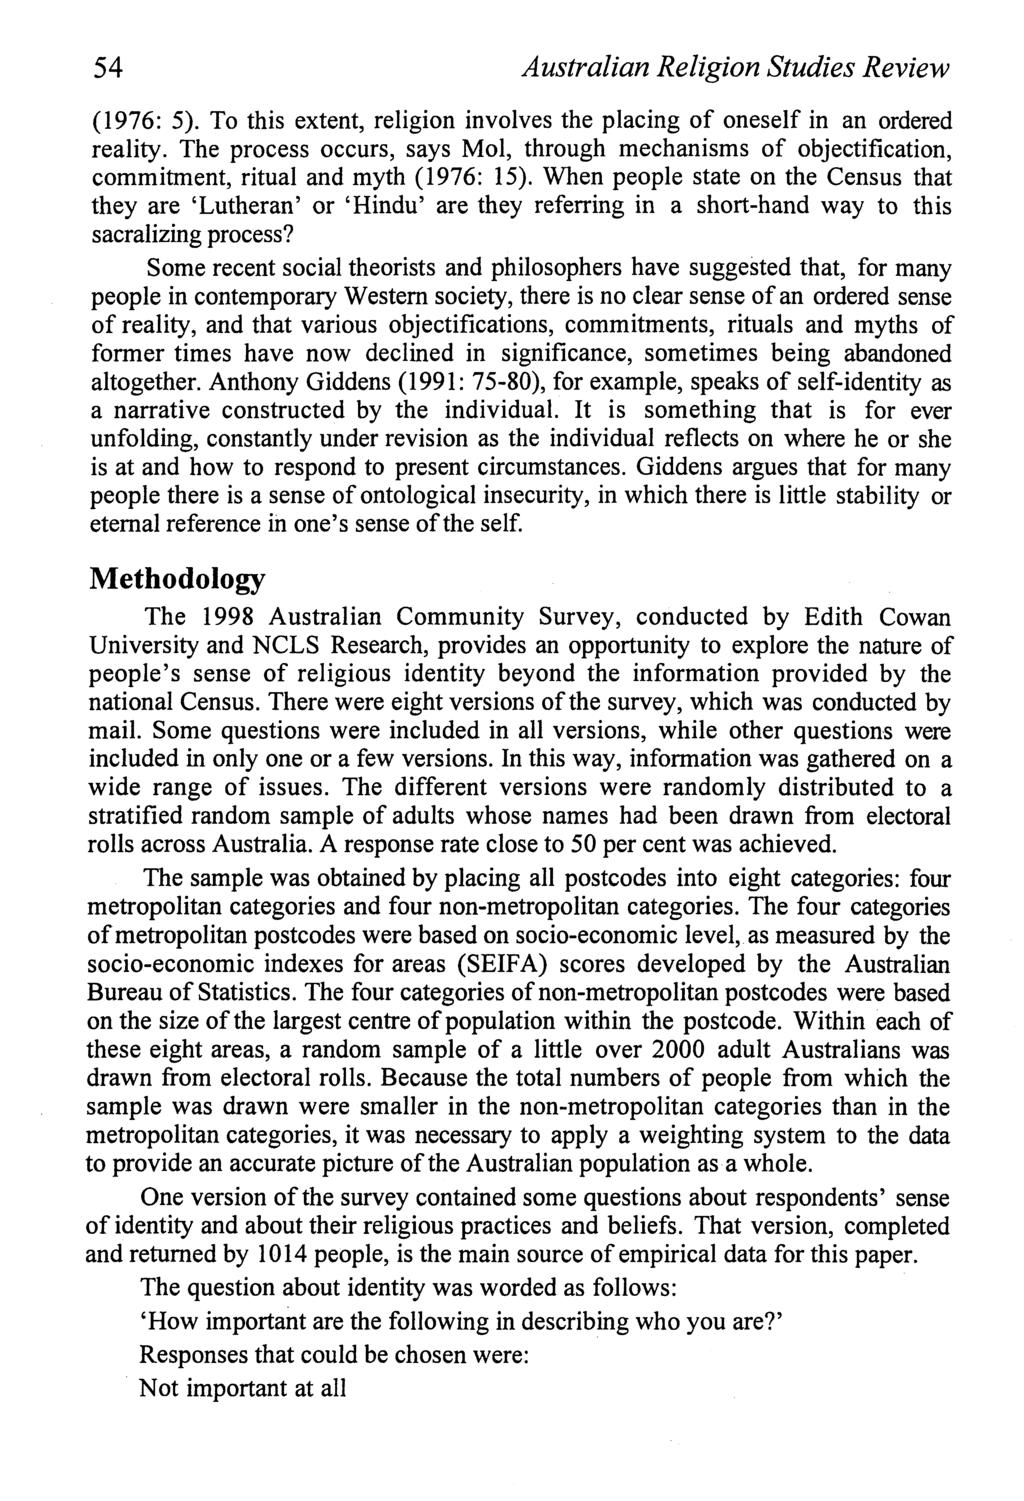 54 Australian Religion Studies Review (1976: 5). To this extent, religion involves the placing of oneself in an ordered reality.